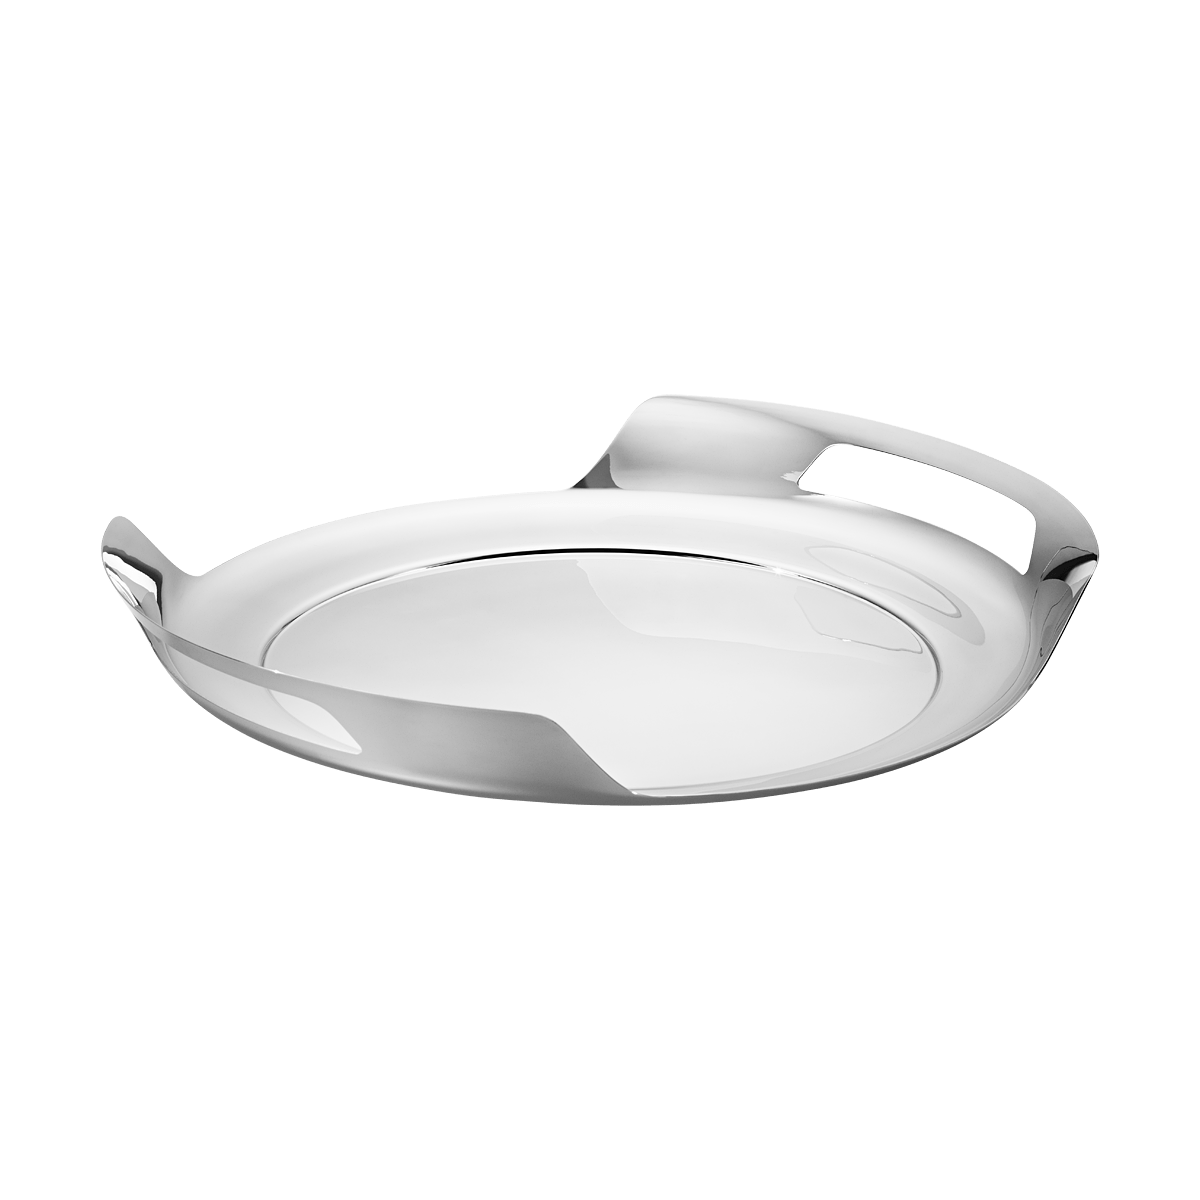 https://res.cloudinary.com/georgjensen/image/upload/f_auto,dpr_2/w_auto,c_scale/products/images/hi-res/10015899-HELIX-tray-stainless-steel-kylberg-bernadotte?_i=AG